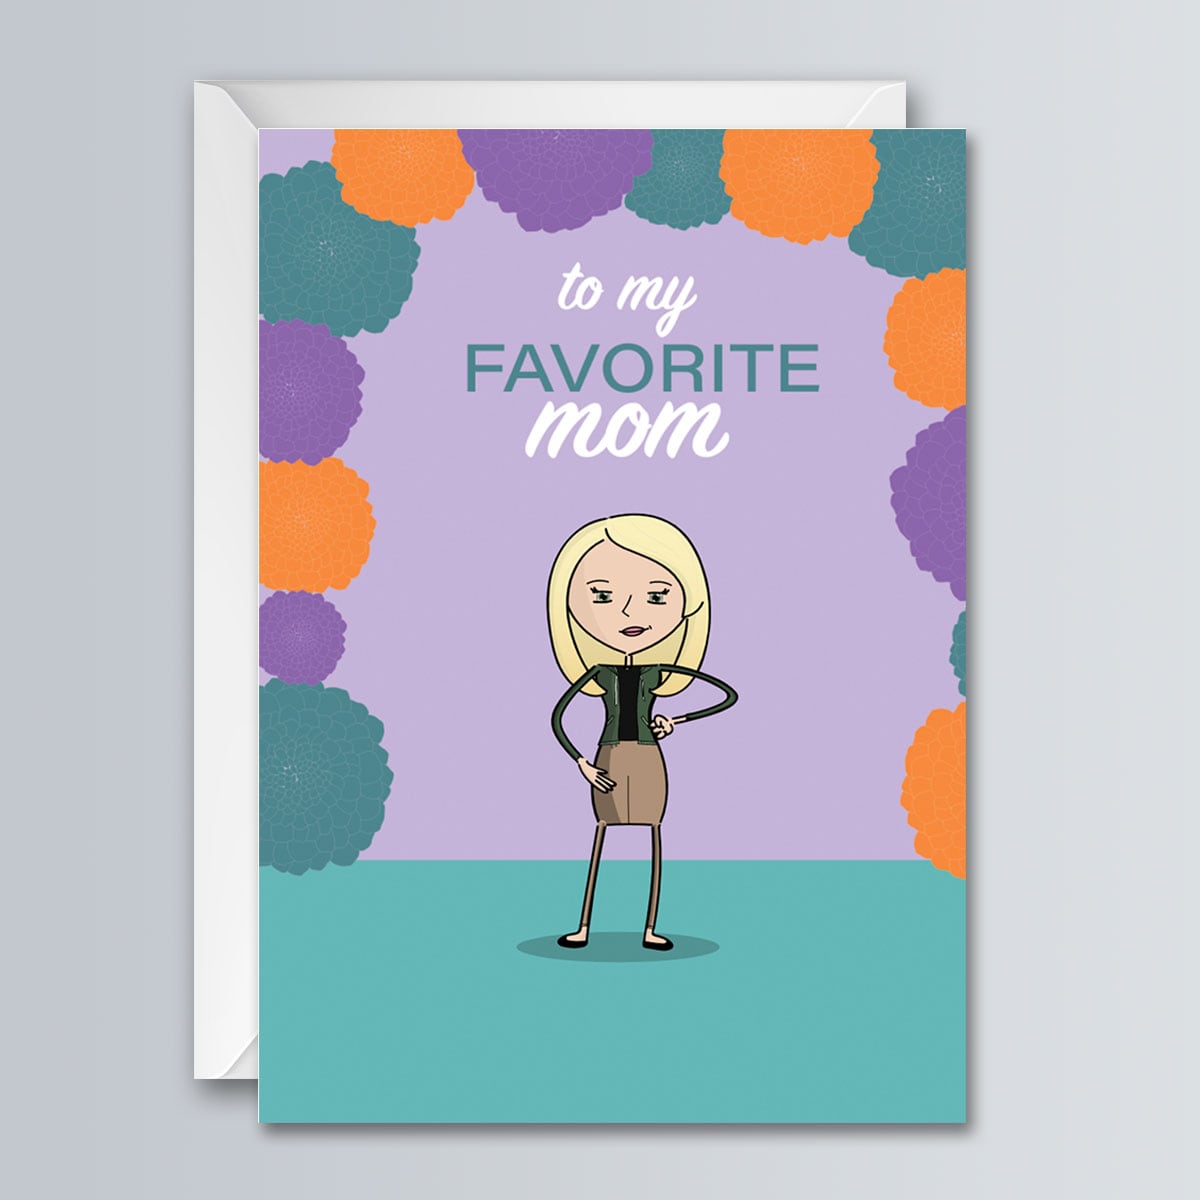 To my Favorite Mom - Greeting Card